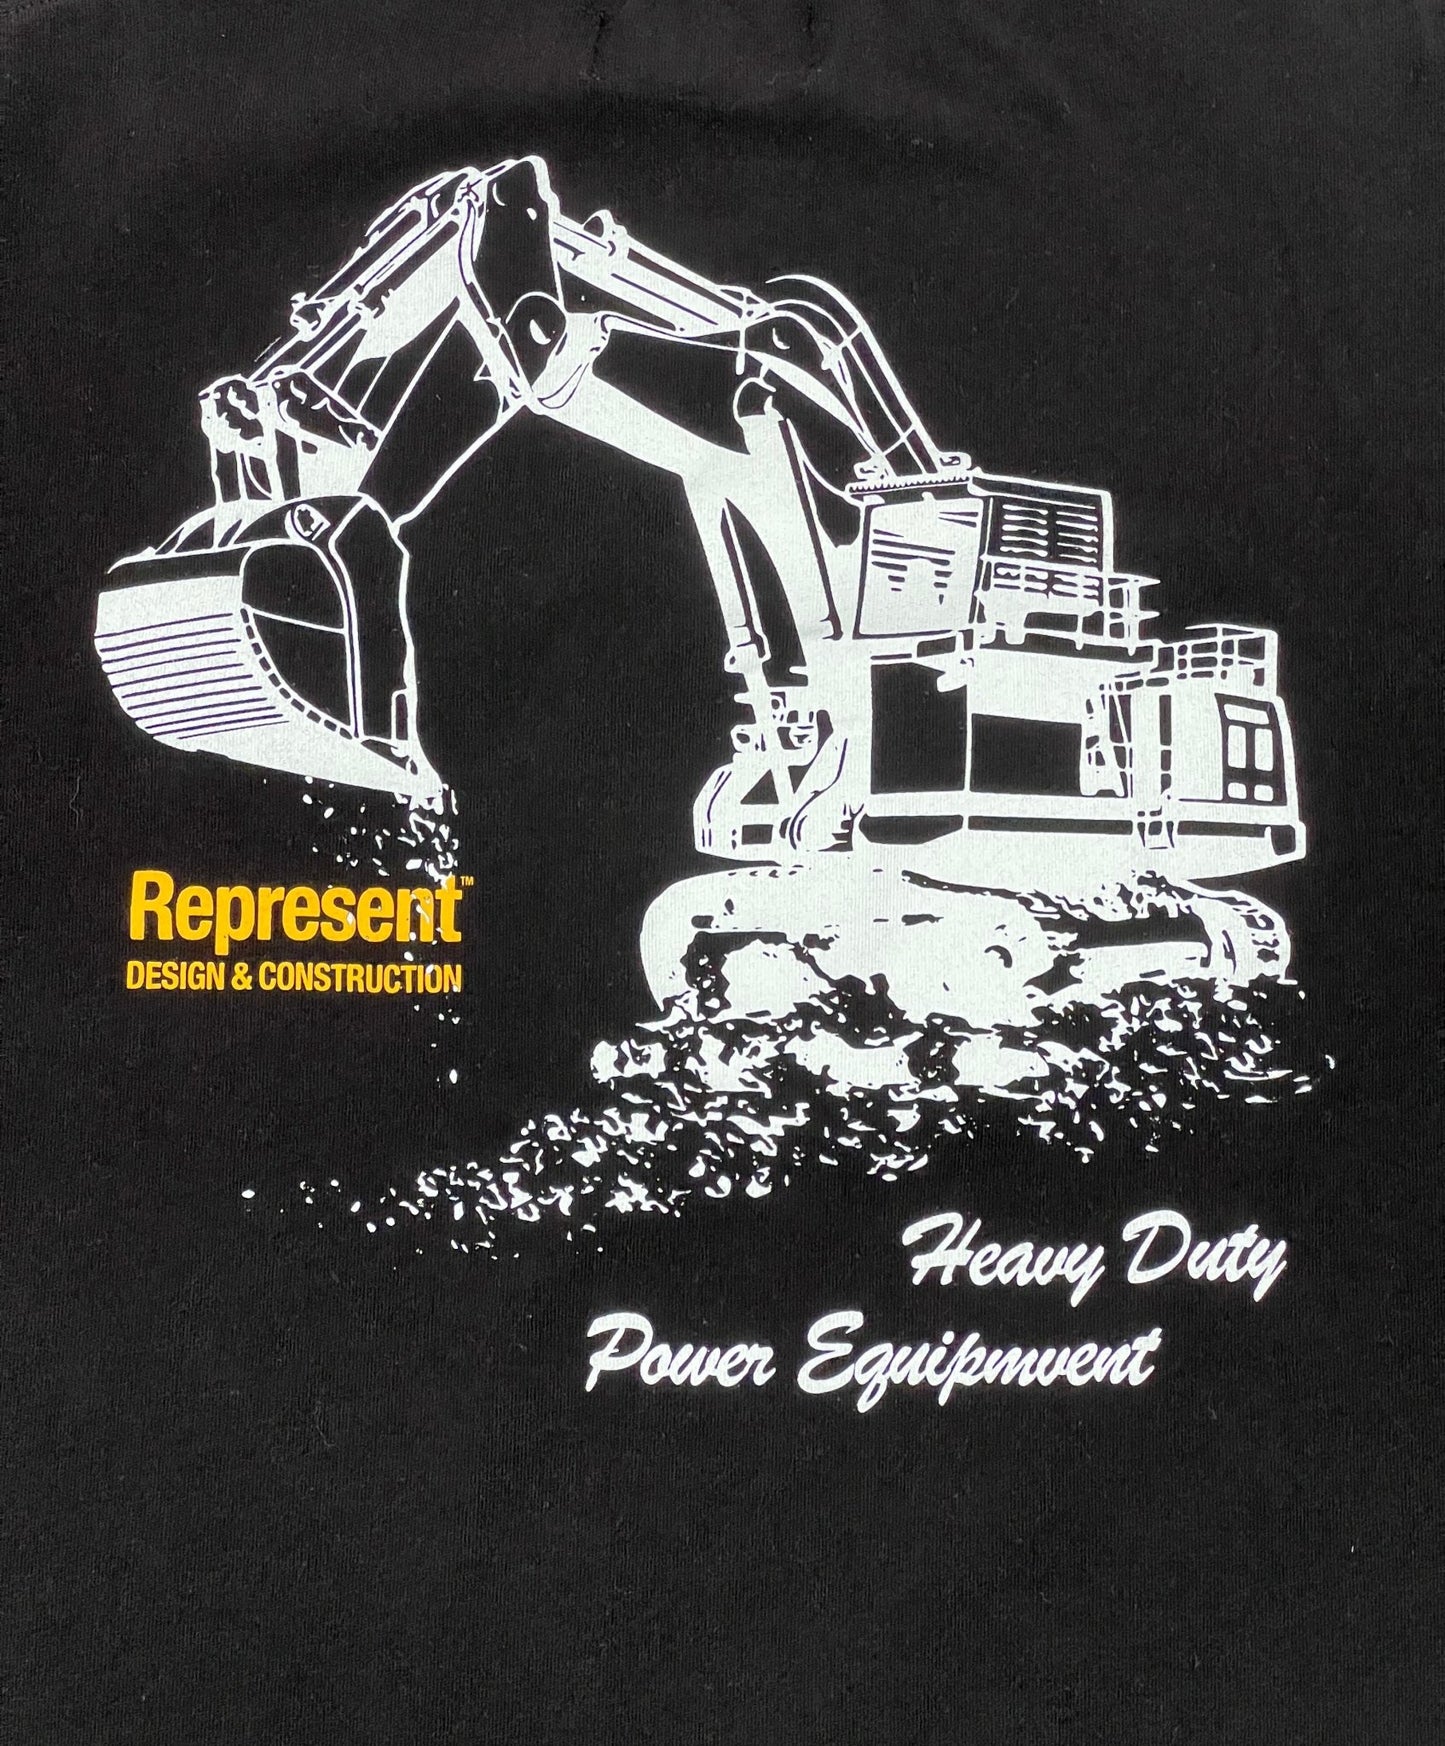 A REPRESENT M05232 DESIGN AND CONSTRUCTION S/S T-SHIRT BLACK from Portugal with an image of an excavator.